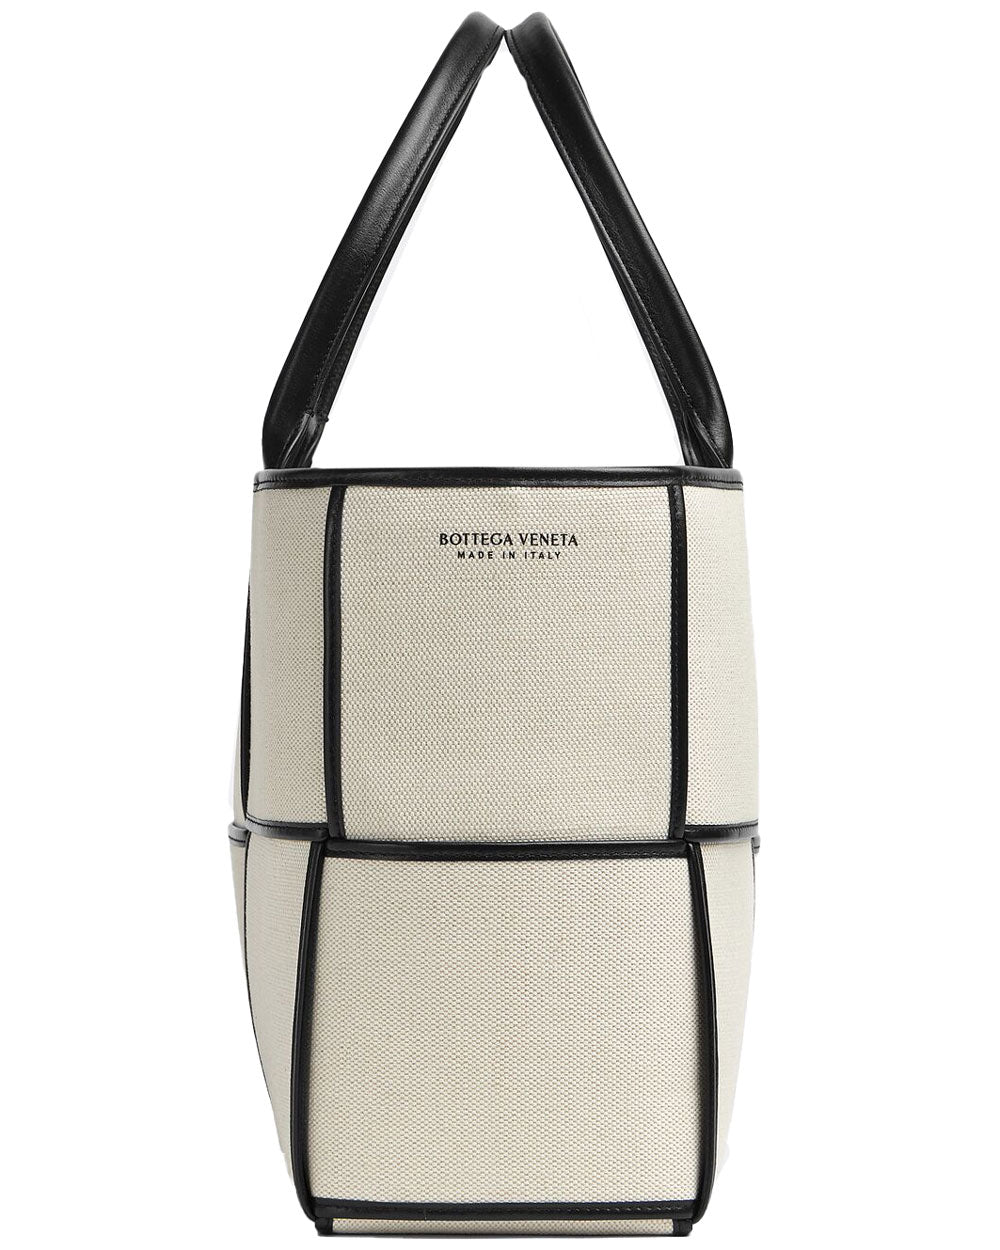 Medium Arco Tote in Natural and Black